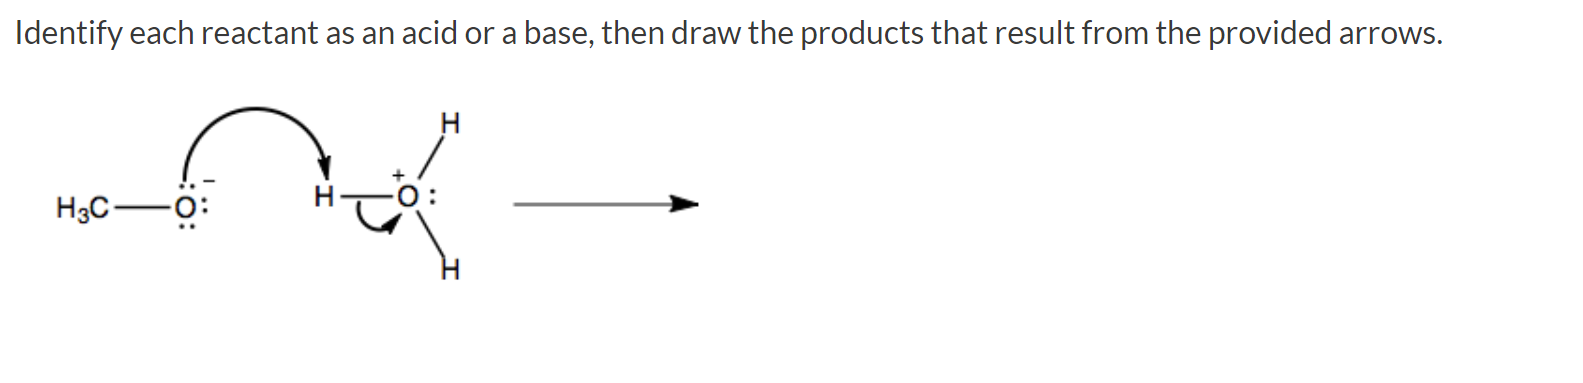 Identify each reactant as an acid or a base, then draw the products that result from the provided arrows.
H3C-0:
